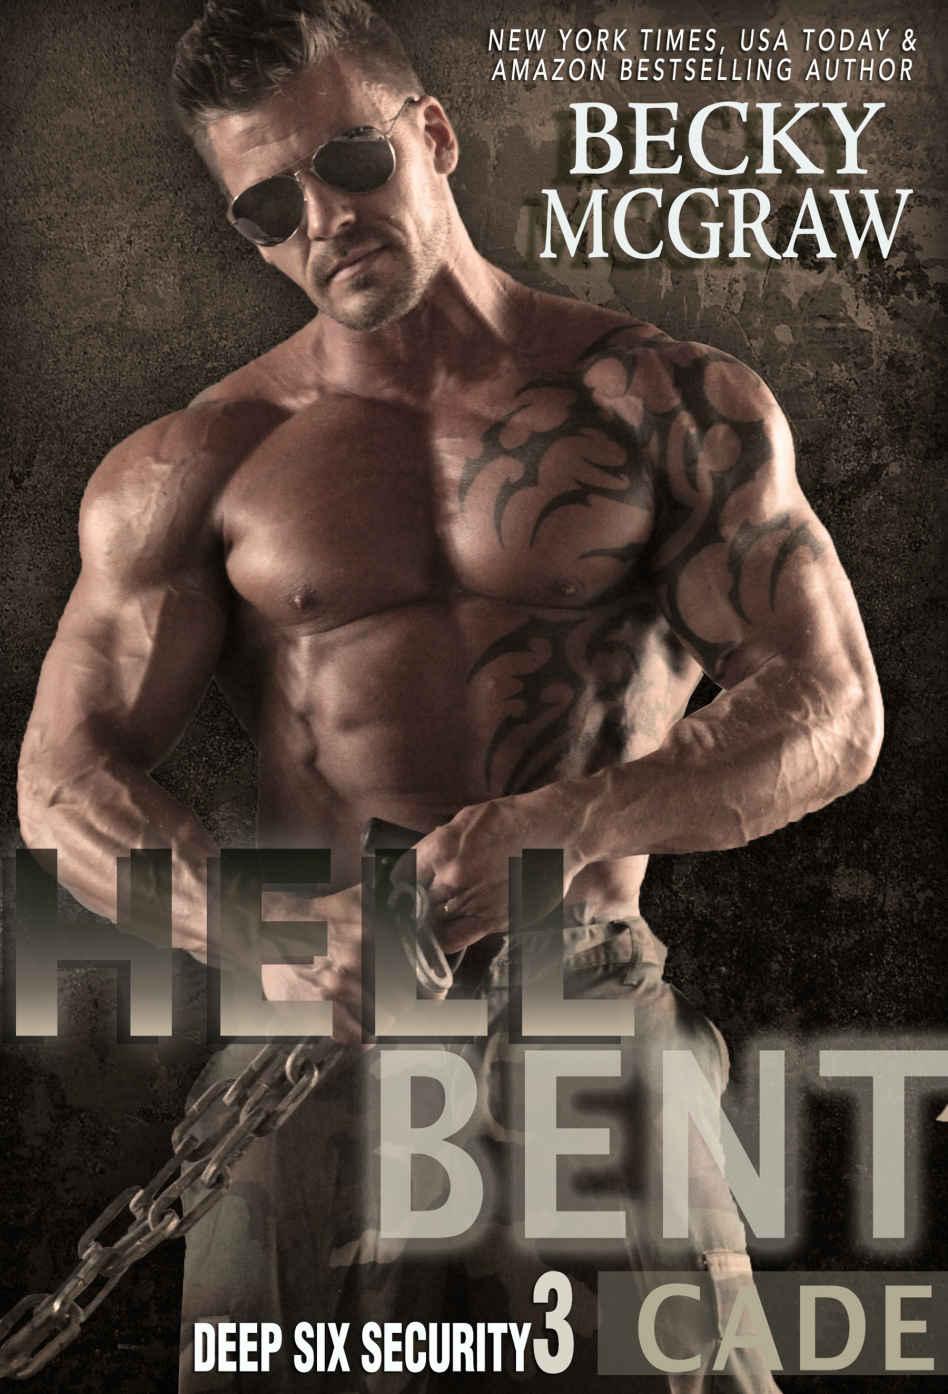 Hell Bent by Becky McGraw